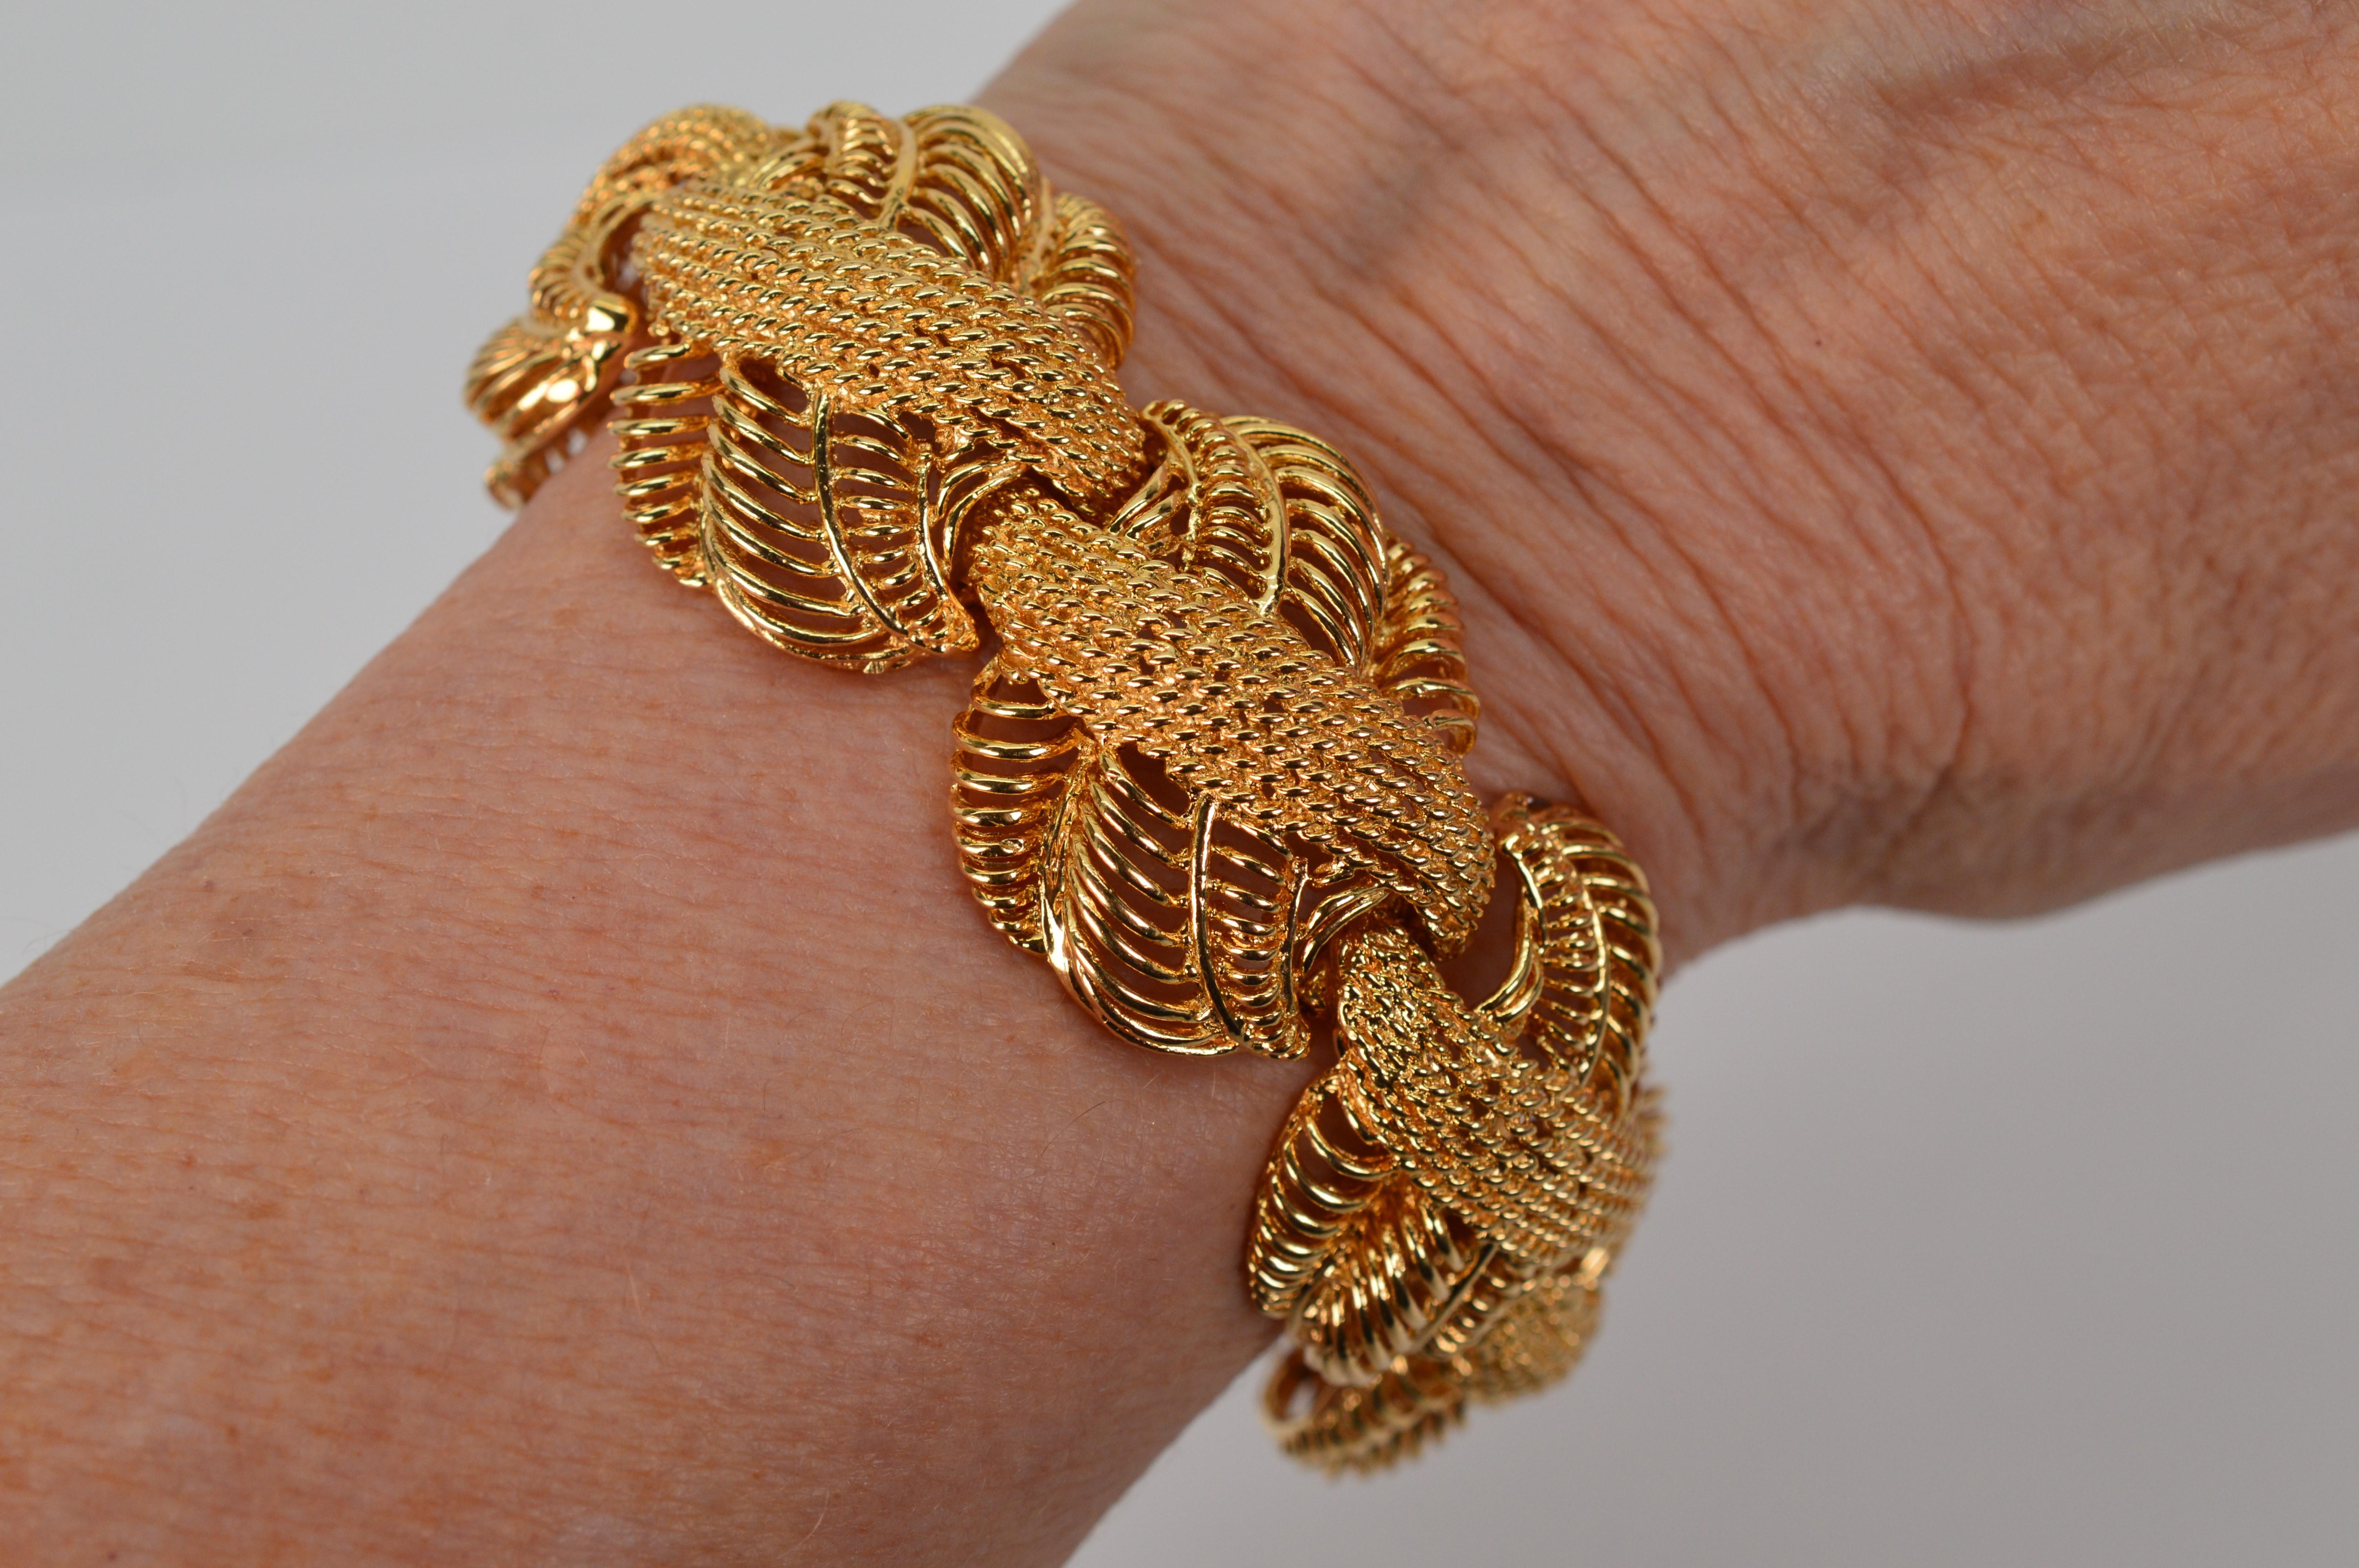 Fancy Open Weave 14 Karat Yellow Gold Rosette Inspired Bracelet In Excellent Condition For Sale In Mount Kisco, NY